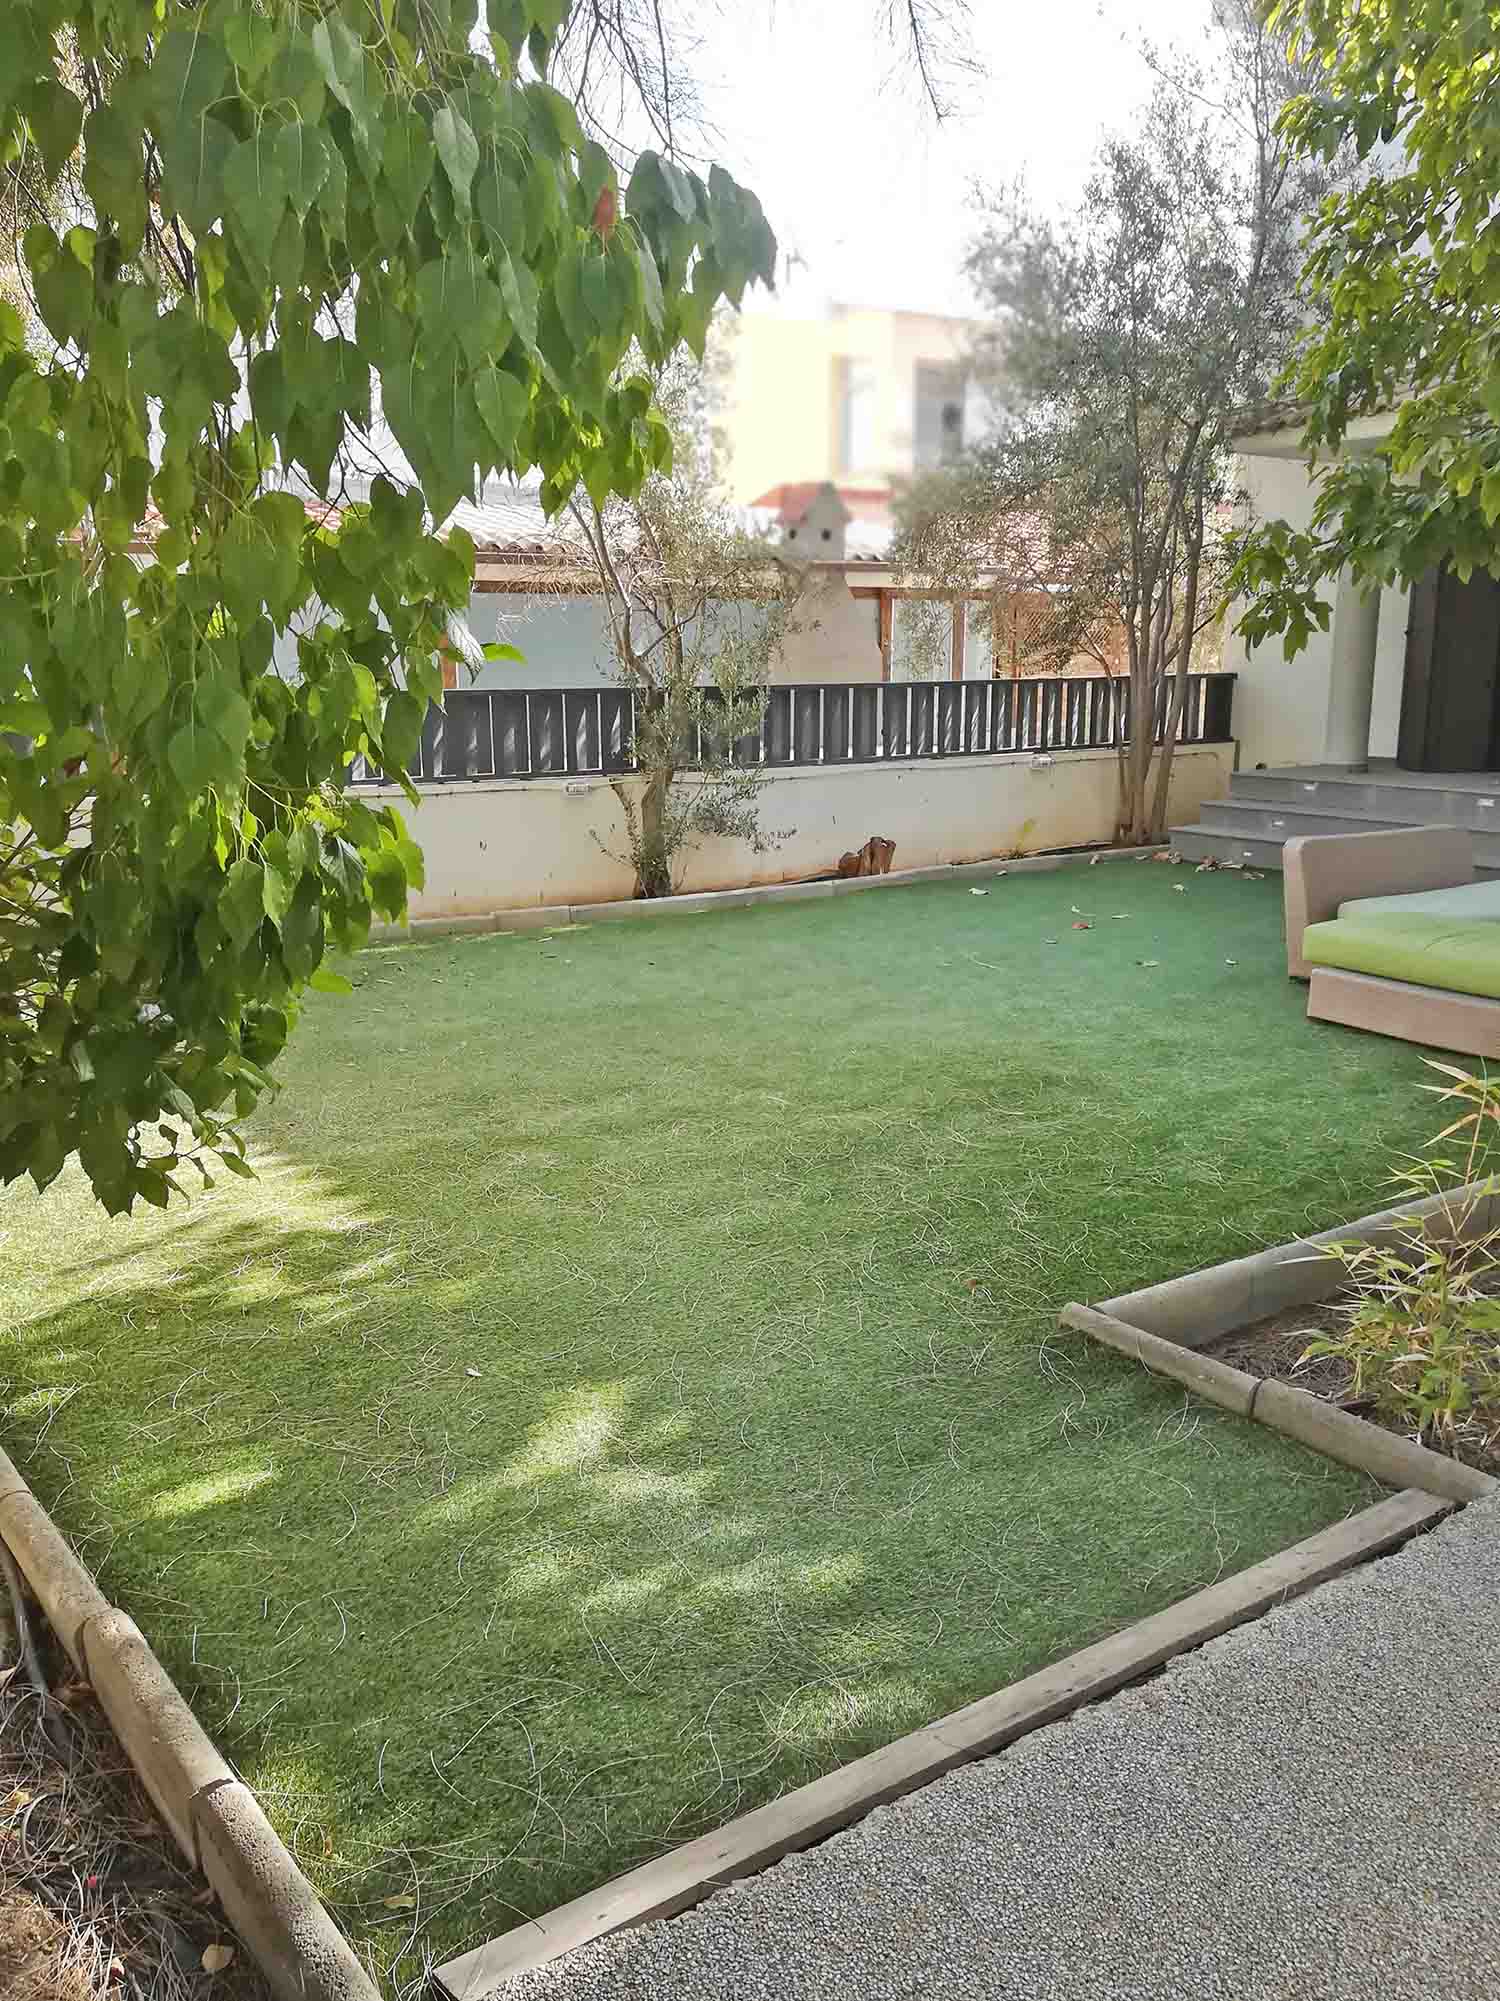 6+ Bedroom House for Sale in Strovolos – Archangelos, Nicosia District